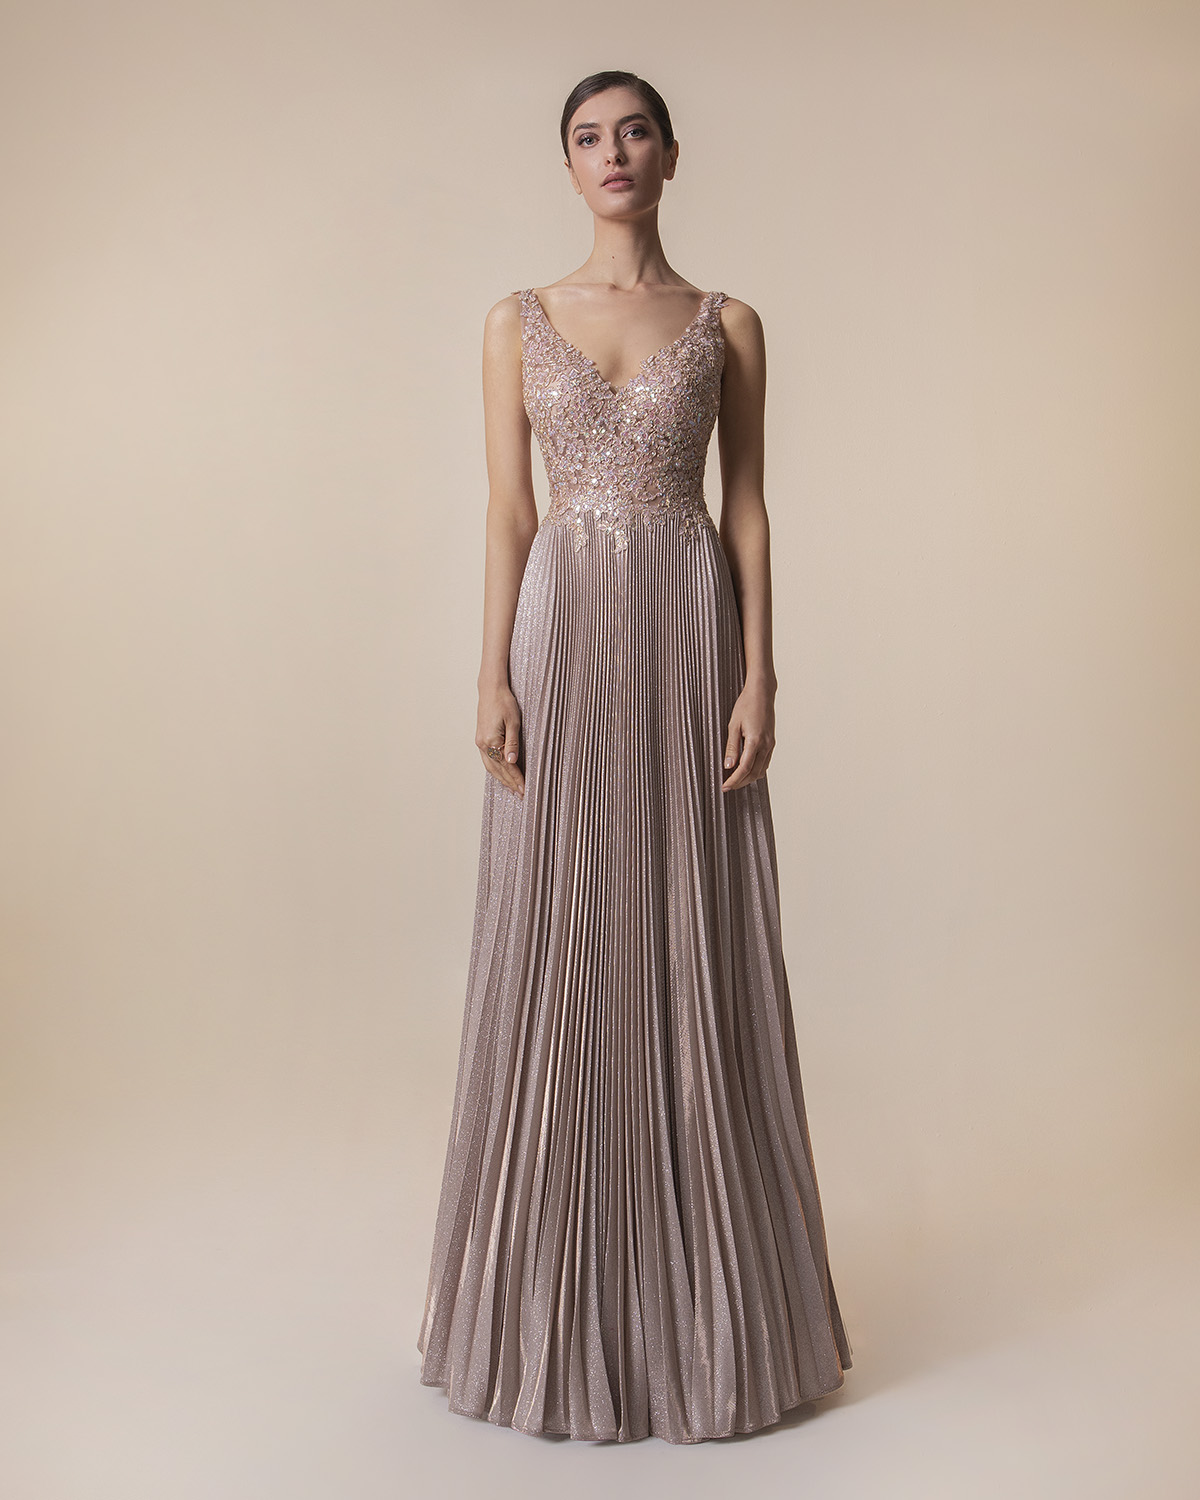 Long pleated dress with shining fabric, applique beaded lace on the top